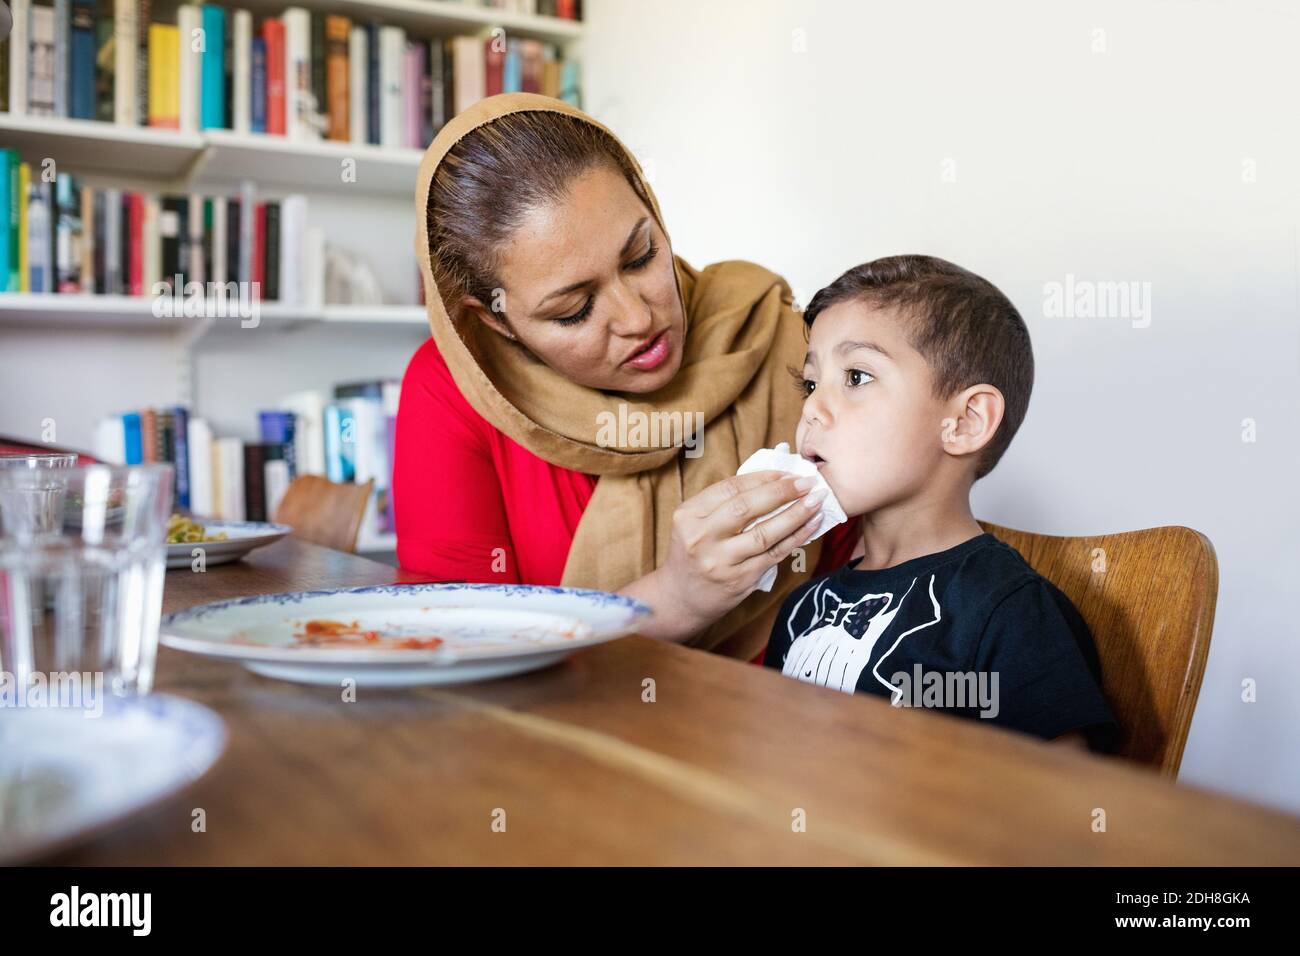 Mother wiping son's mouth after lunch at dining table Stock Photo